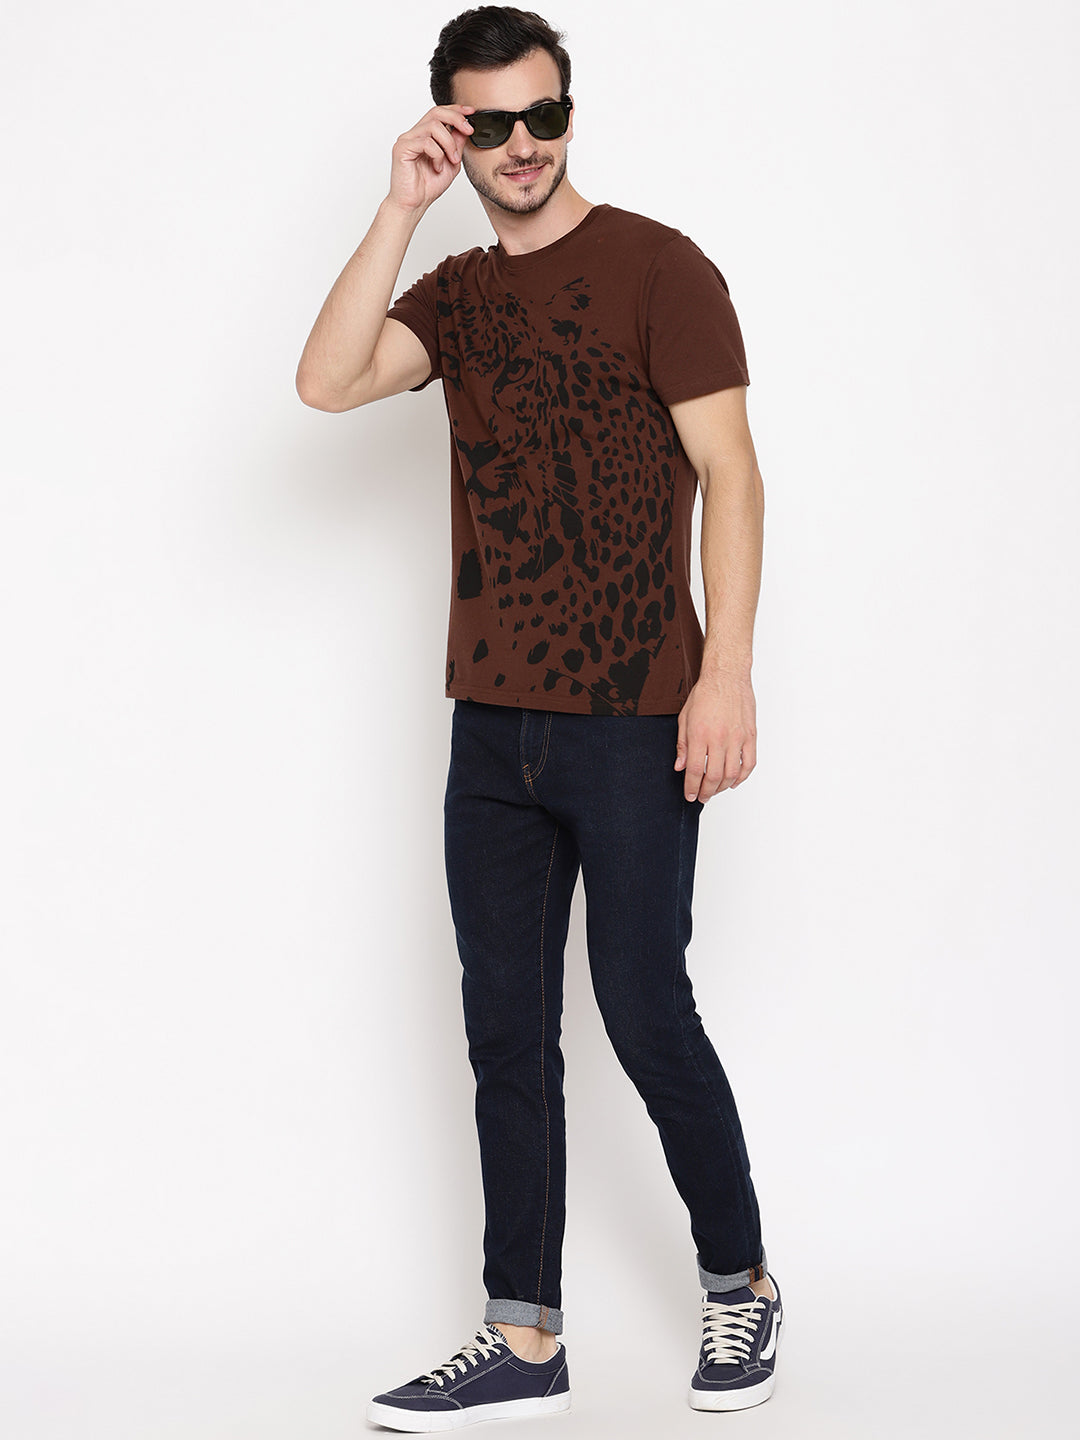 Leopard Graphic Choco Brown Printed Men T-Shirt Wolfpack